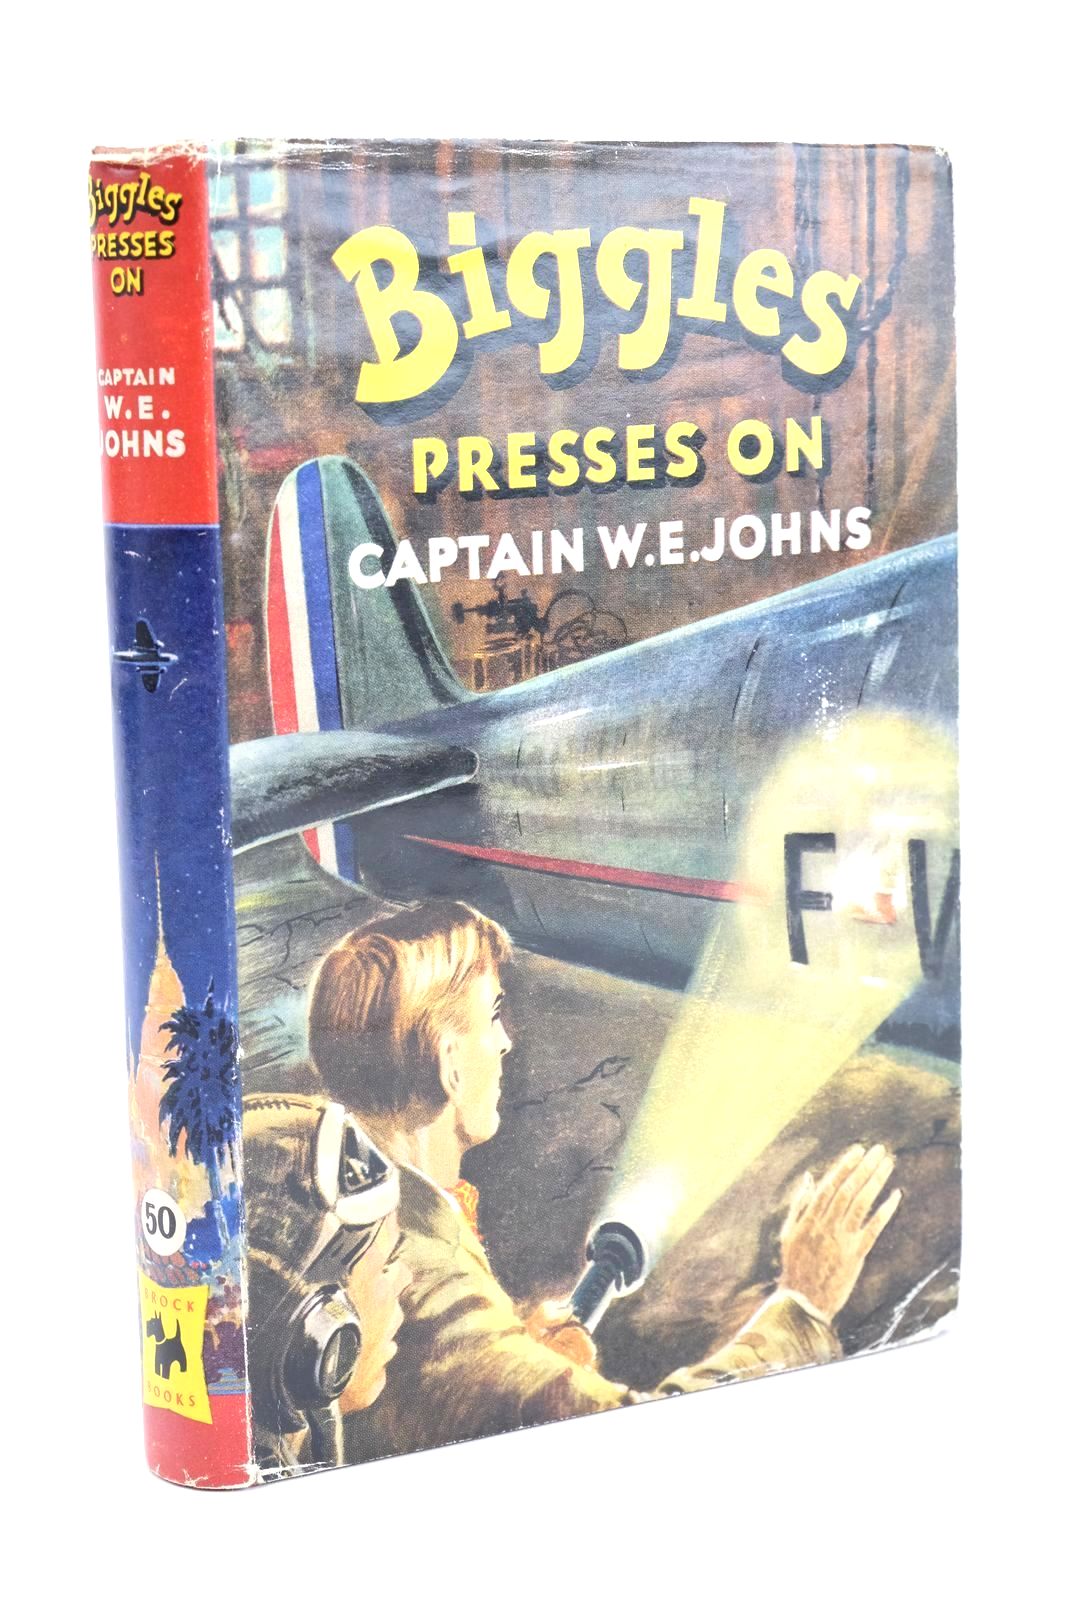 Photo of BIGGLES PRESSES ON written by Johns, W.E. illustrated by Stead, Leslie published by Brockhampton Press (STOCK CODE: 1324413)  for sale by Stella & Rose's Books